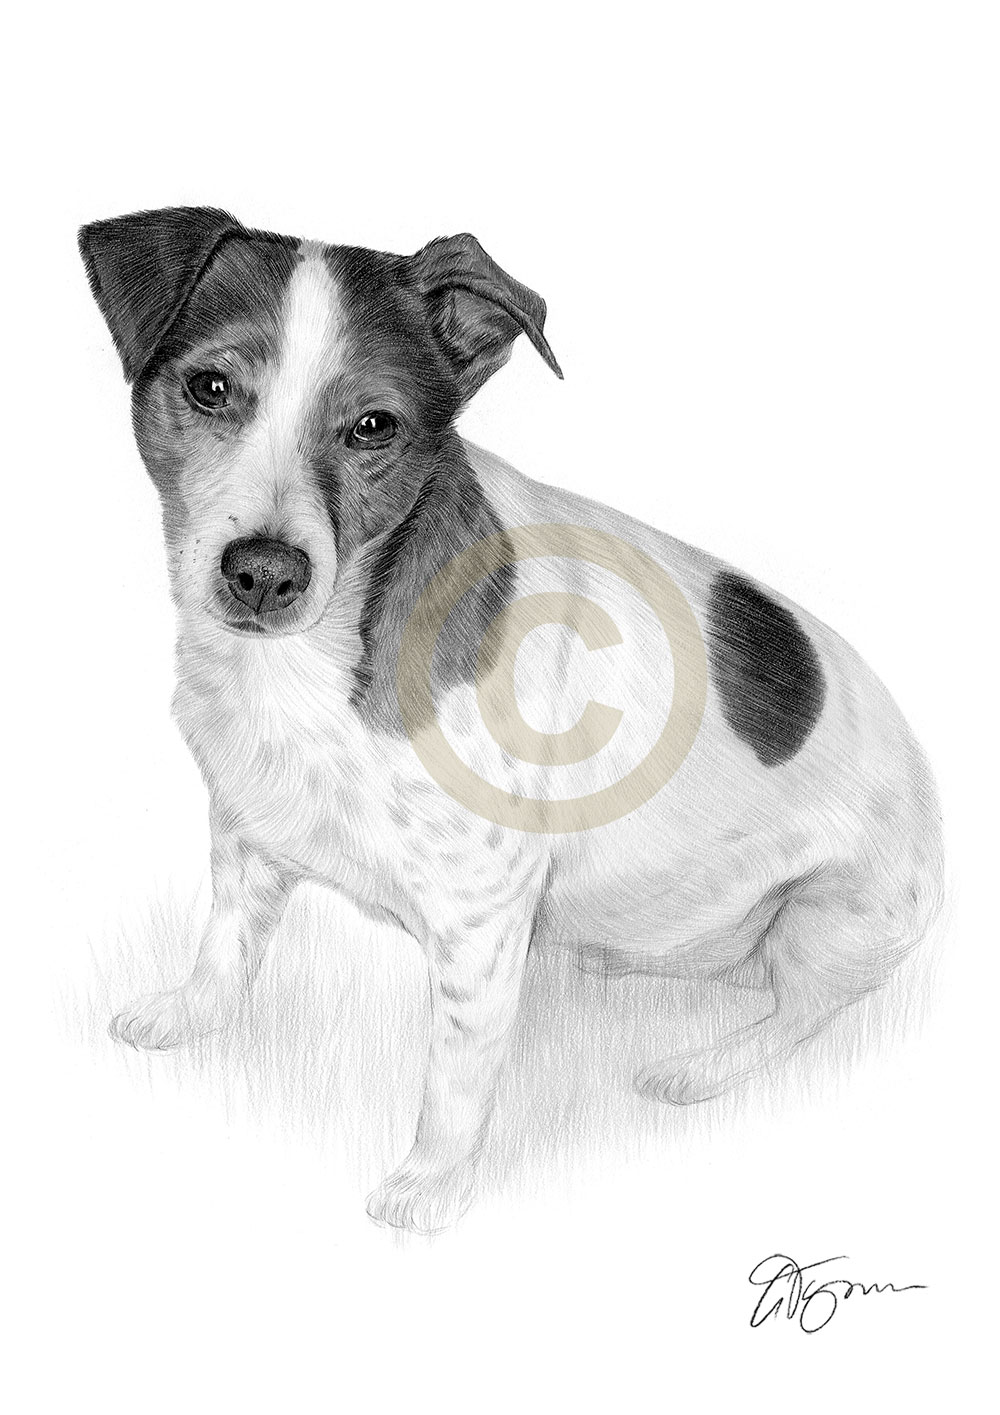 Pet portrait commission of a jack russell by artist Gary Tymon